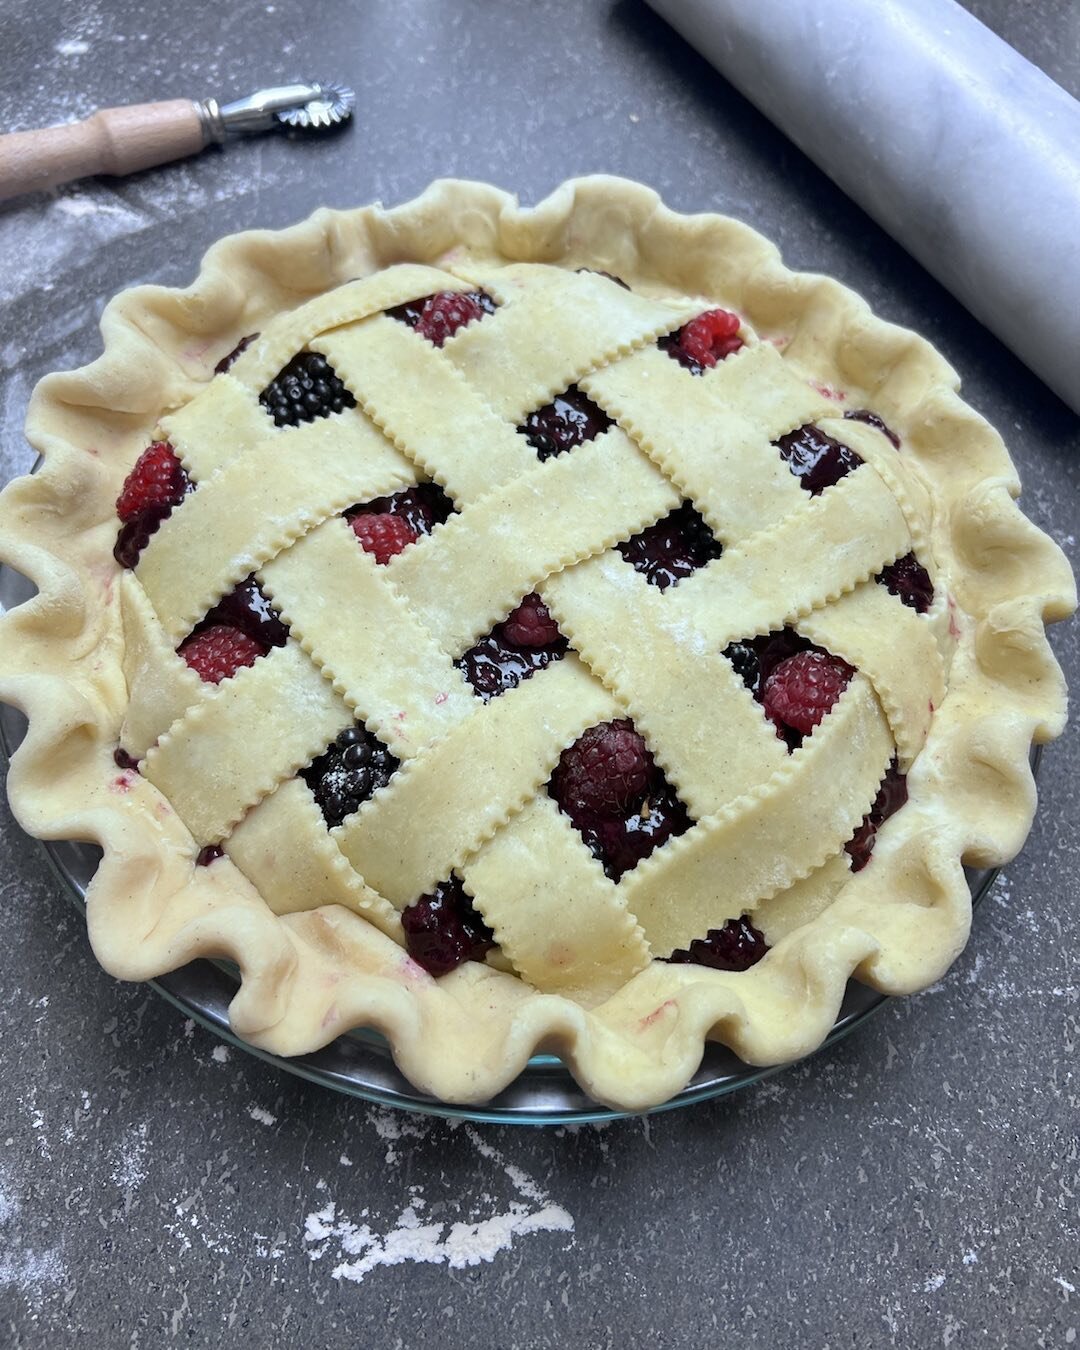 Pie makes any day better. #pie #berrypie #bakingfromtheheart